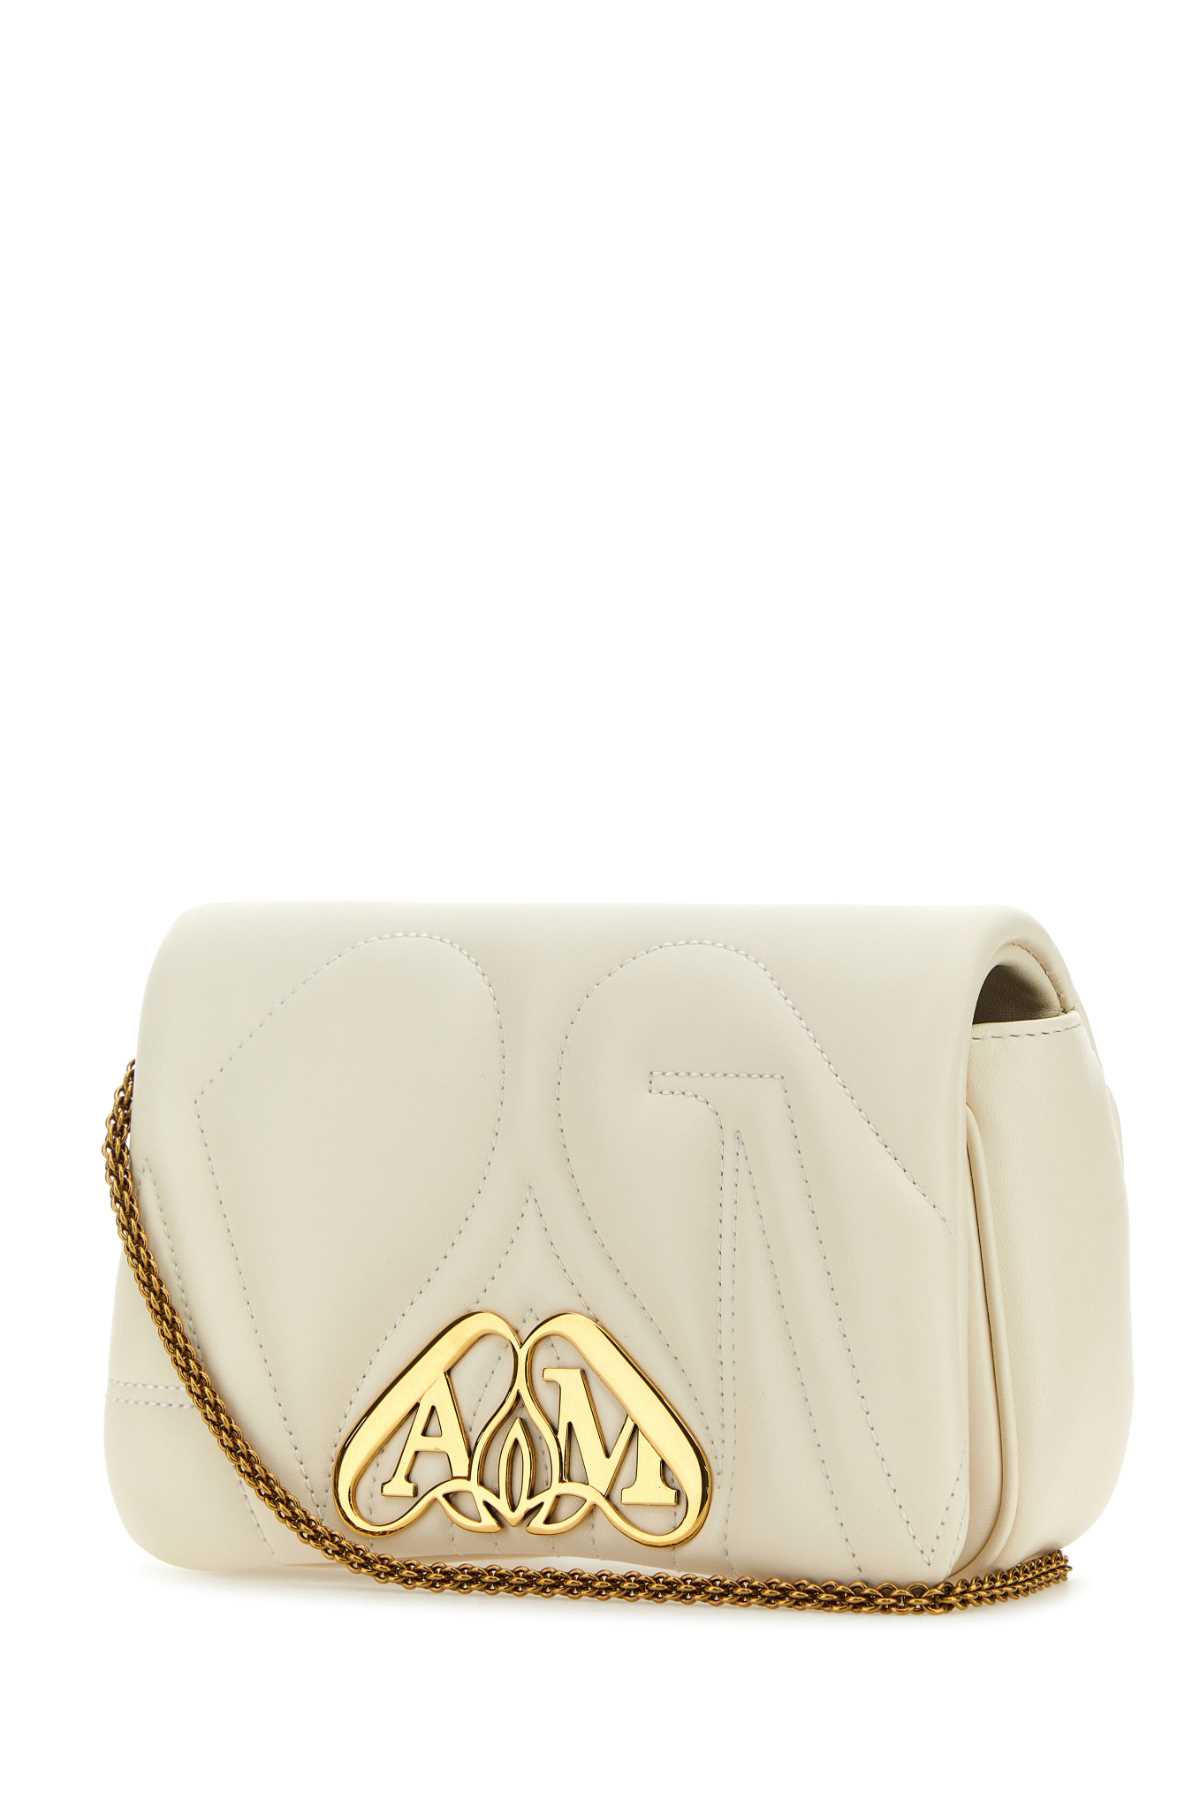 ALEXANDER MCQUEEN IVORY LEATHER MINI SEAL CLUTCH